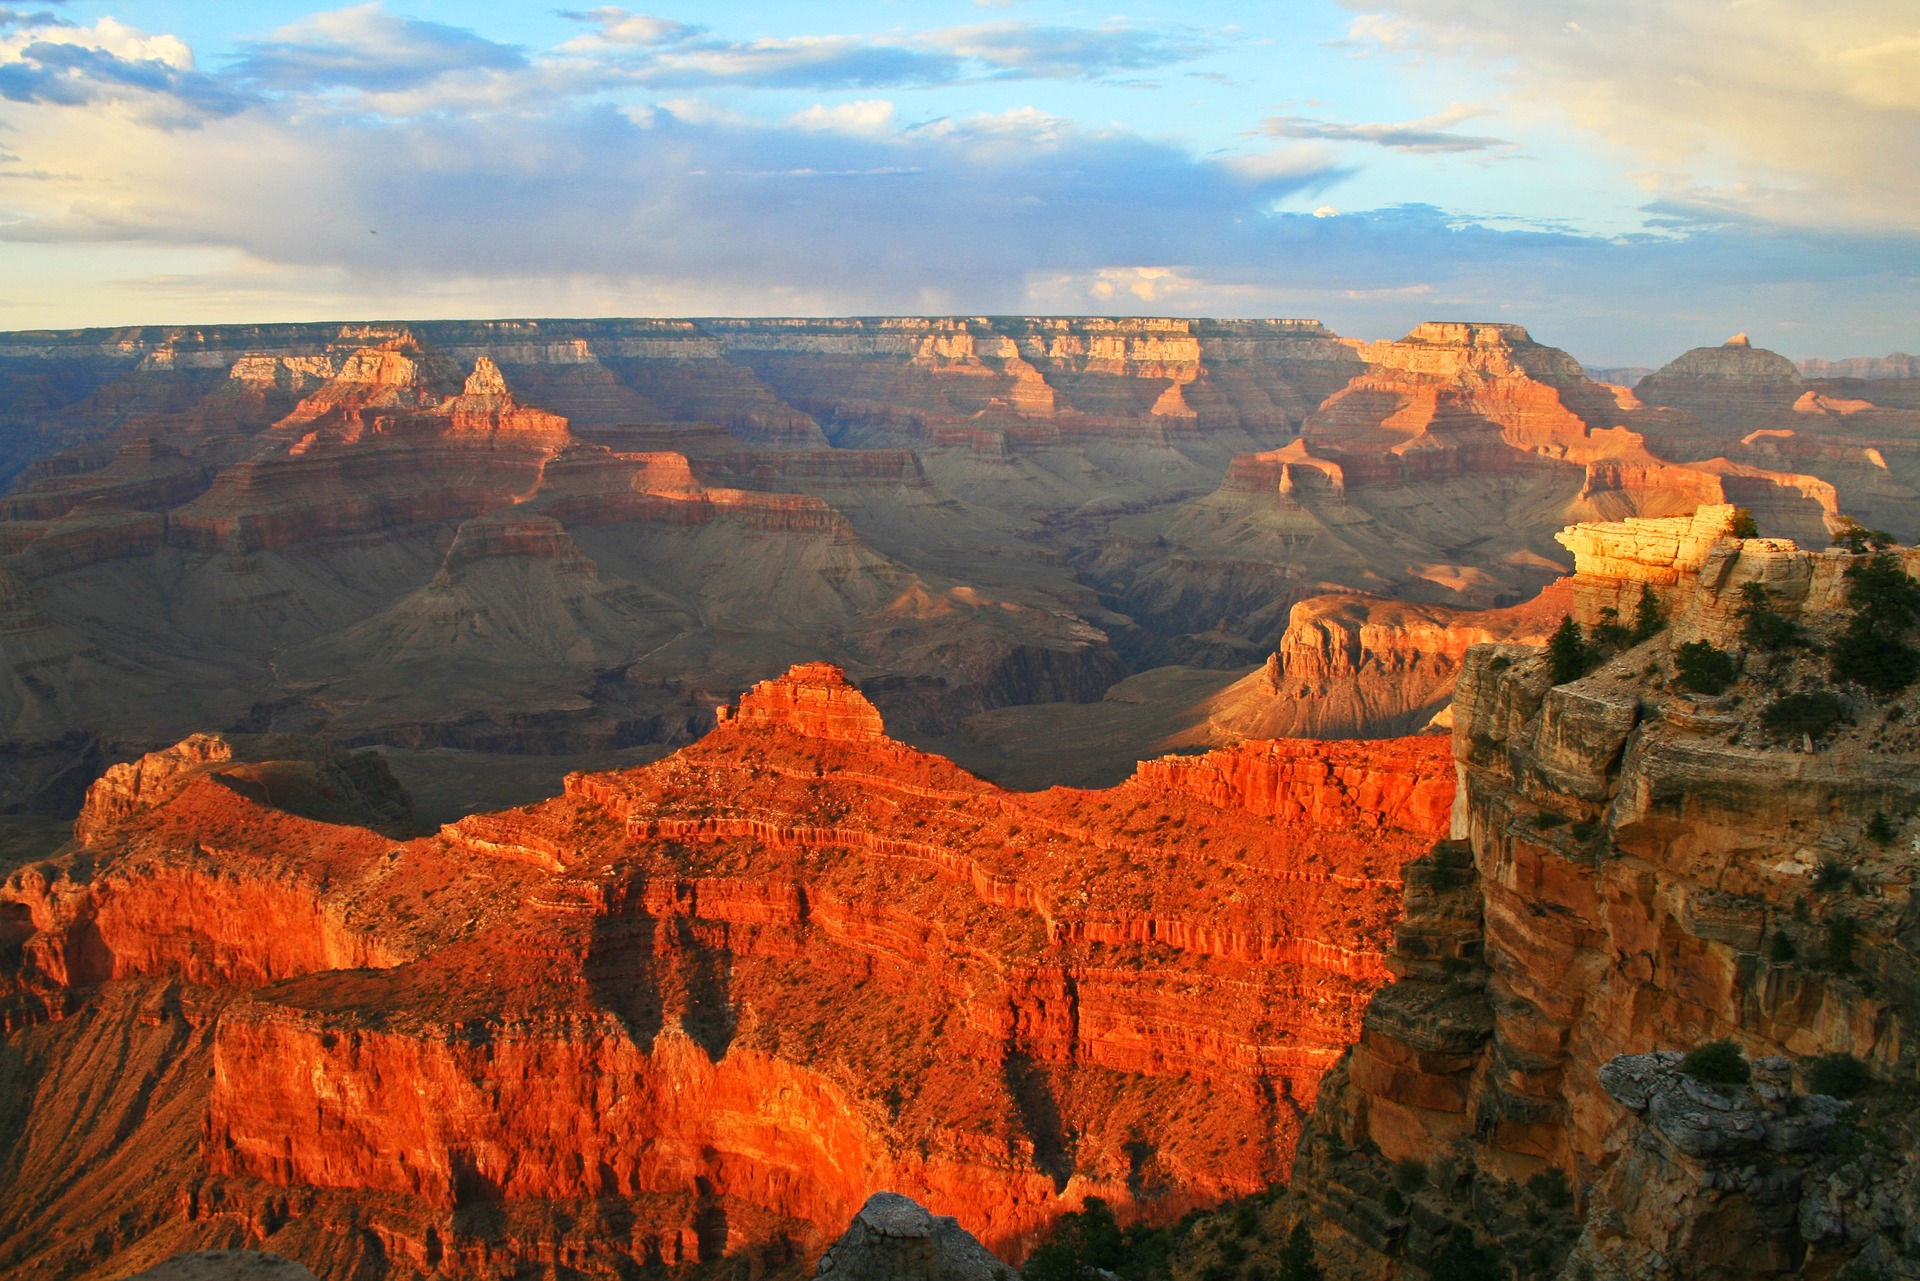 Grand Canyon: Image by Filio from Pixabay